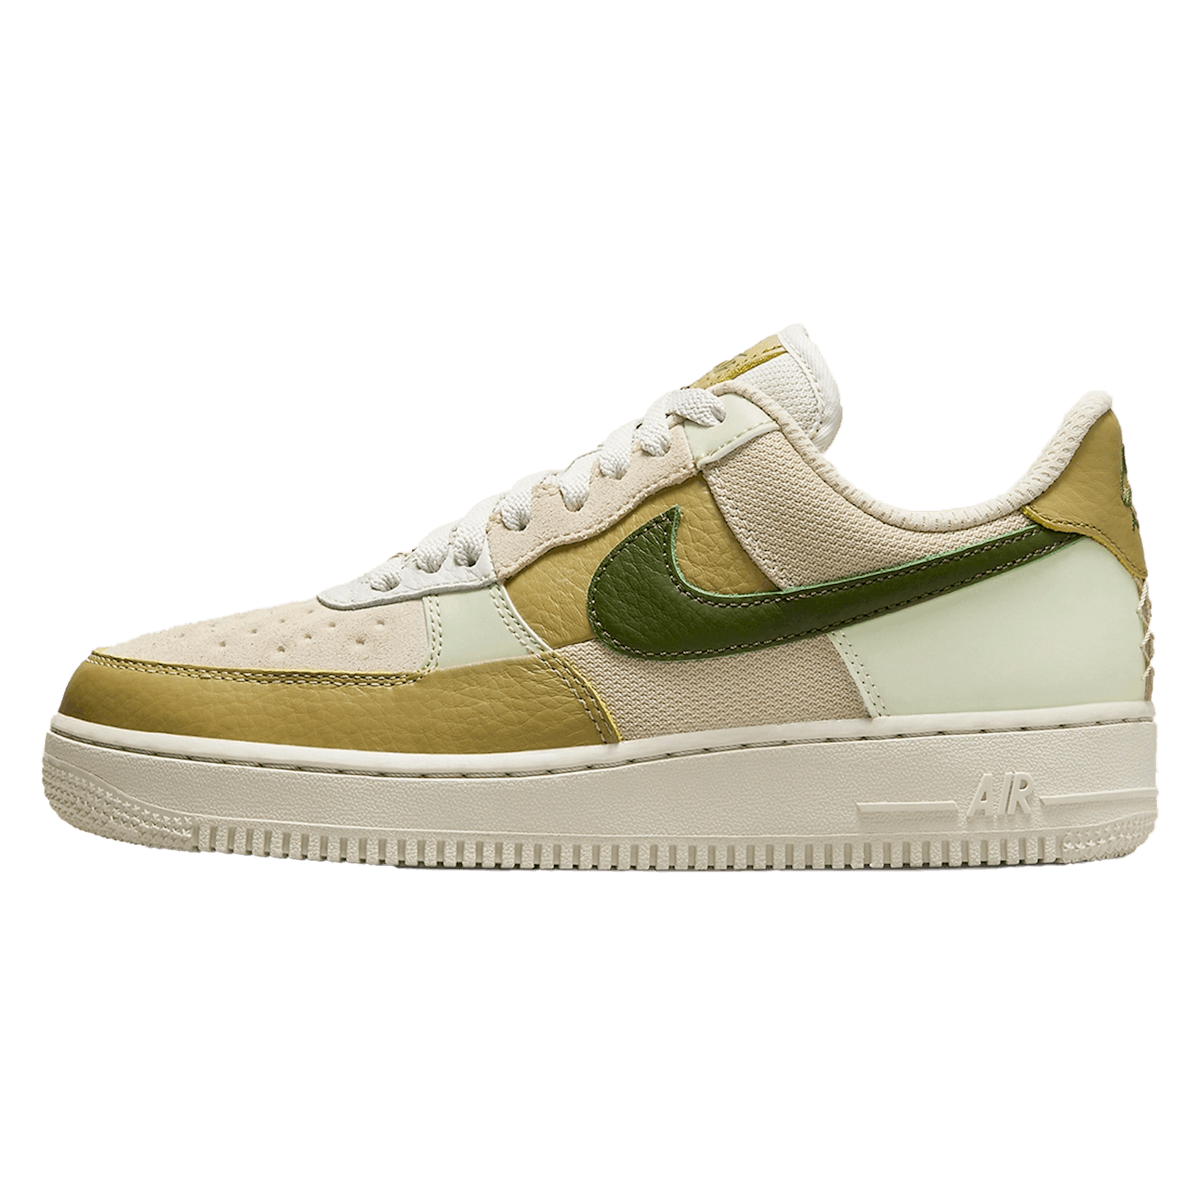 Nike Air Force 1 Low "Rough Green"